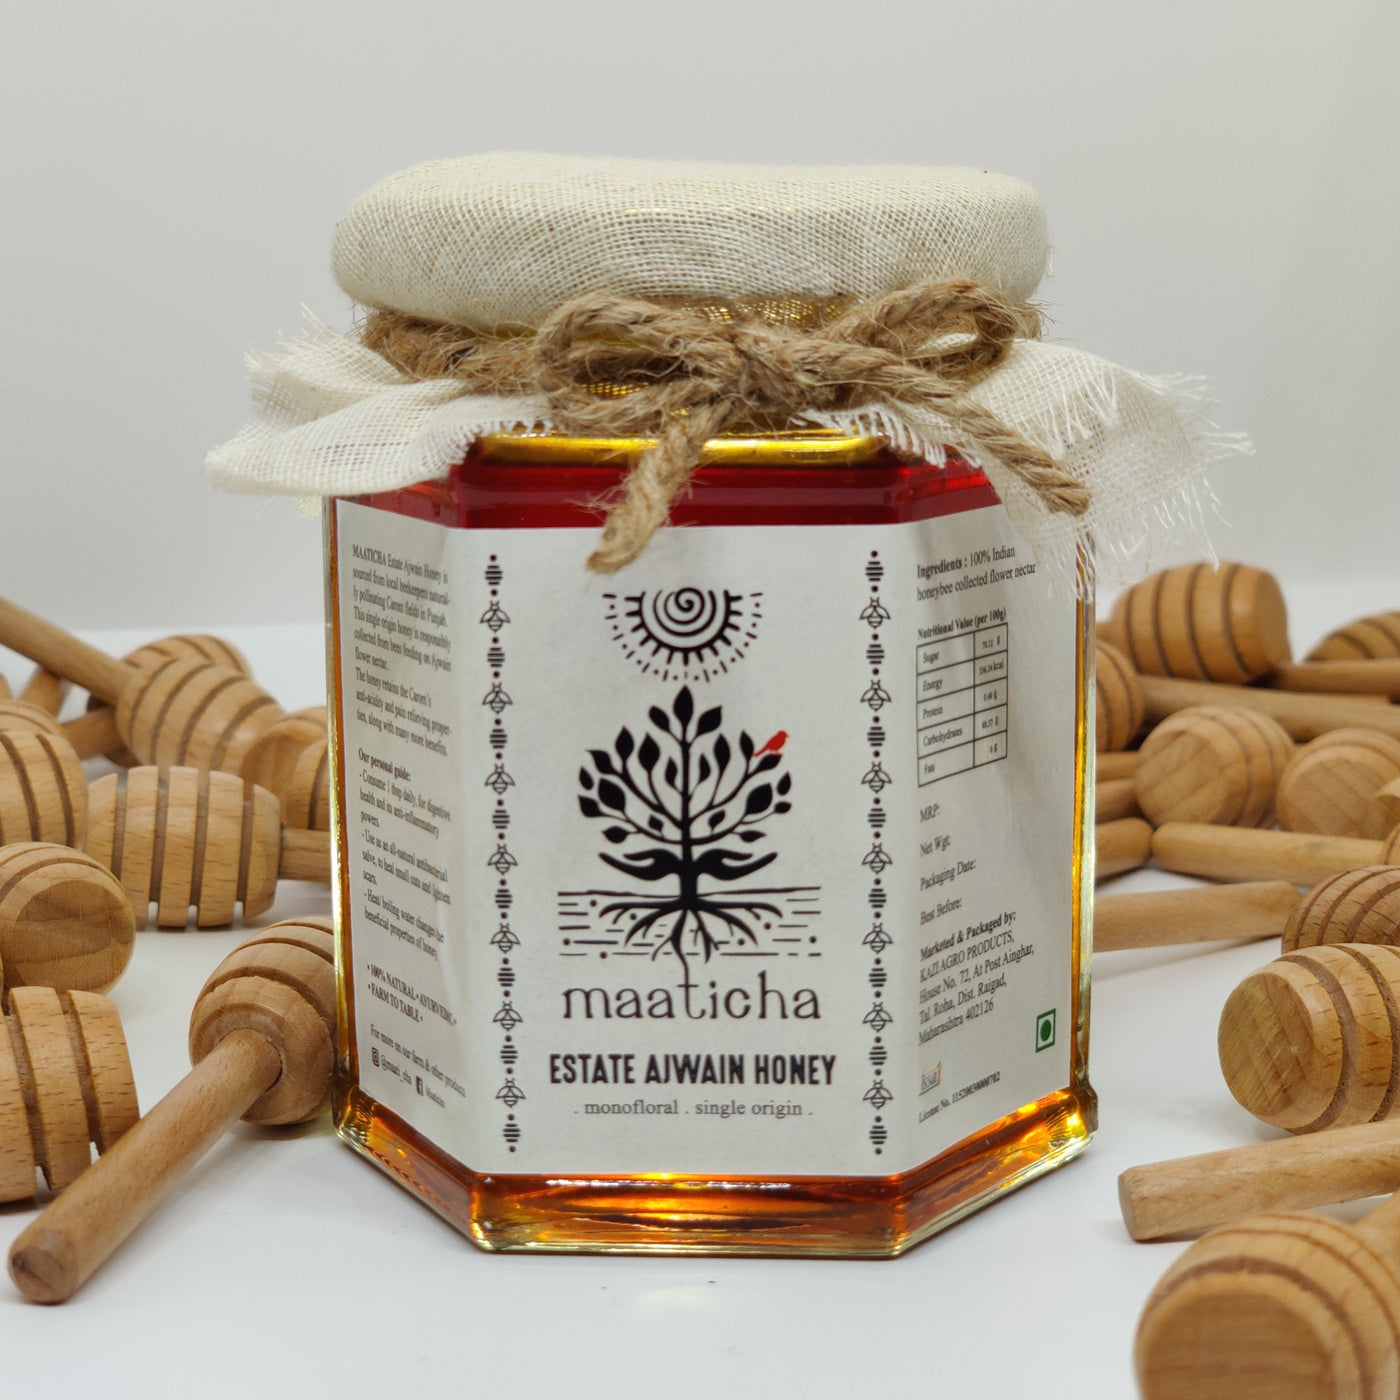 Estate Ajwain Honey is sourced from local beekeepers naturally pollinating Carom fields in Punjab. This honey retains the Carom's anti acidity and pain relieving properties, along with many more benefits.